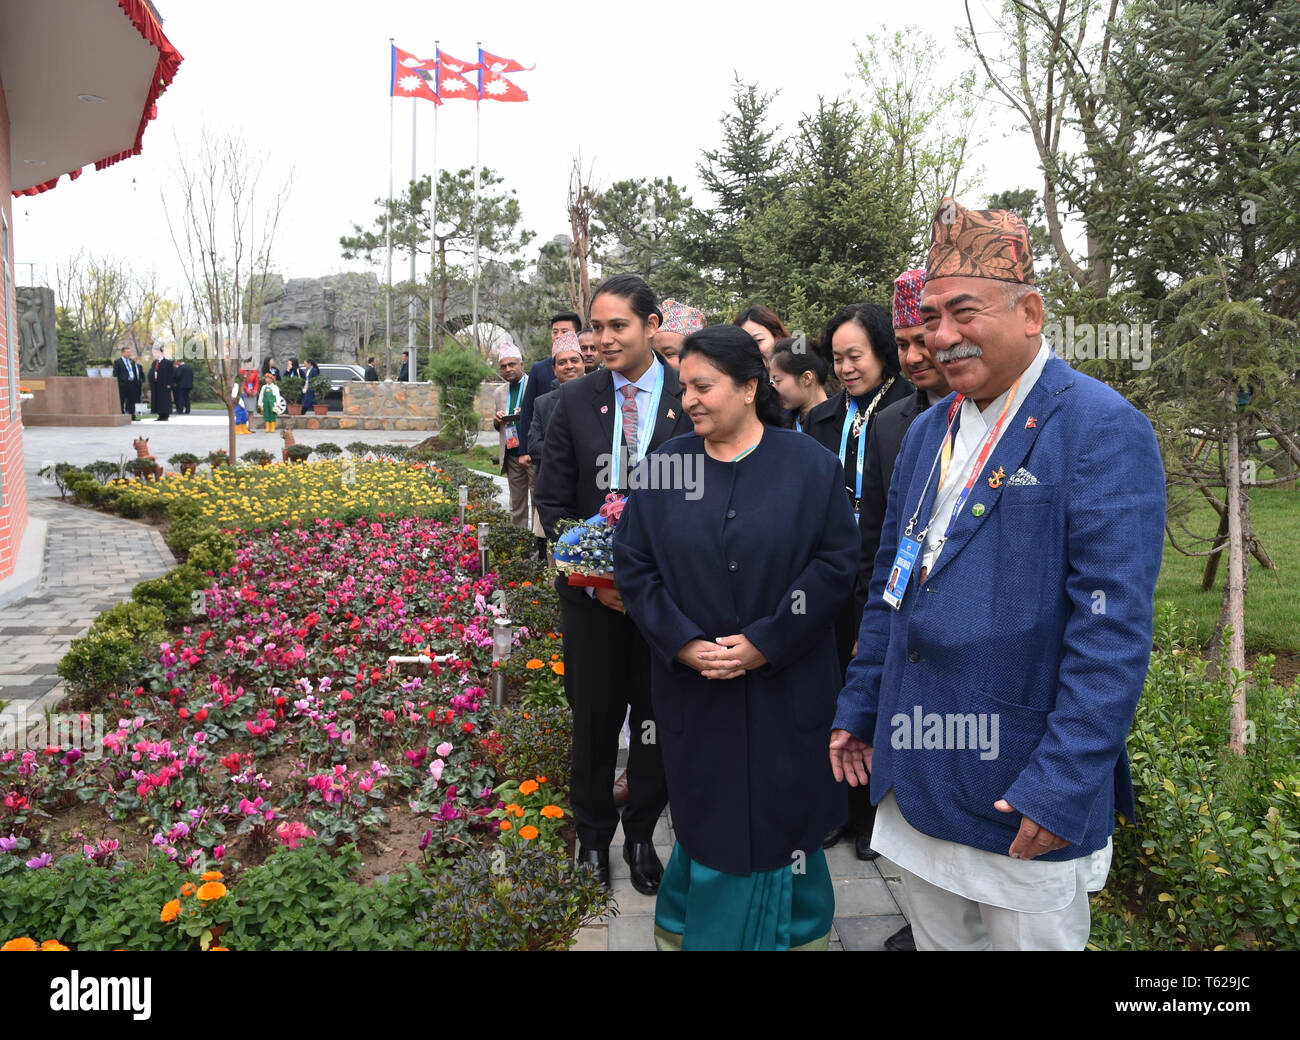 Beijing, China. 28th Apr, 2019. Nepalese President Bidhya Devi Bhandari visits the Nepal Garden at the International Horticulture zone of the International Horticultural Exhibition 2019 Beijing, in Beijing, capital of China, April 28, 2019. Credit: Ren Chao/Xinhua/Alamy Live News Stock Photo